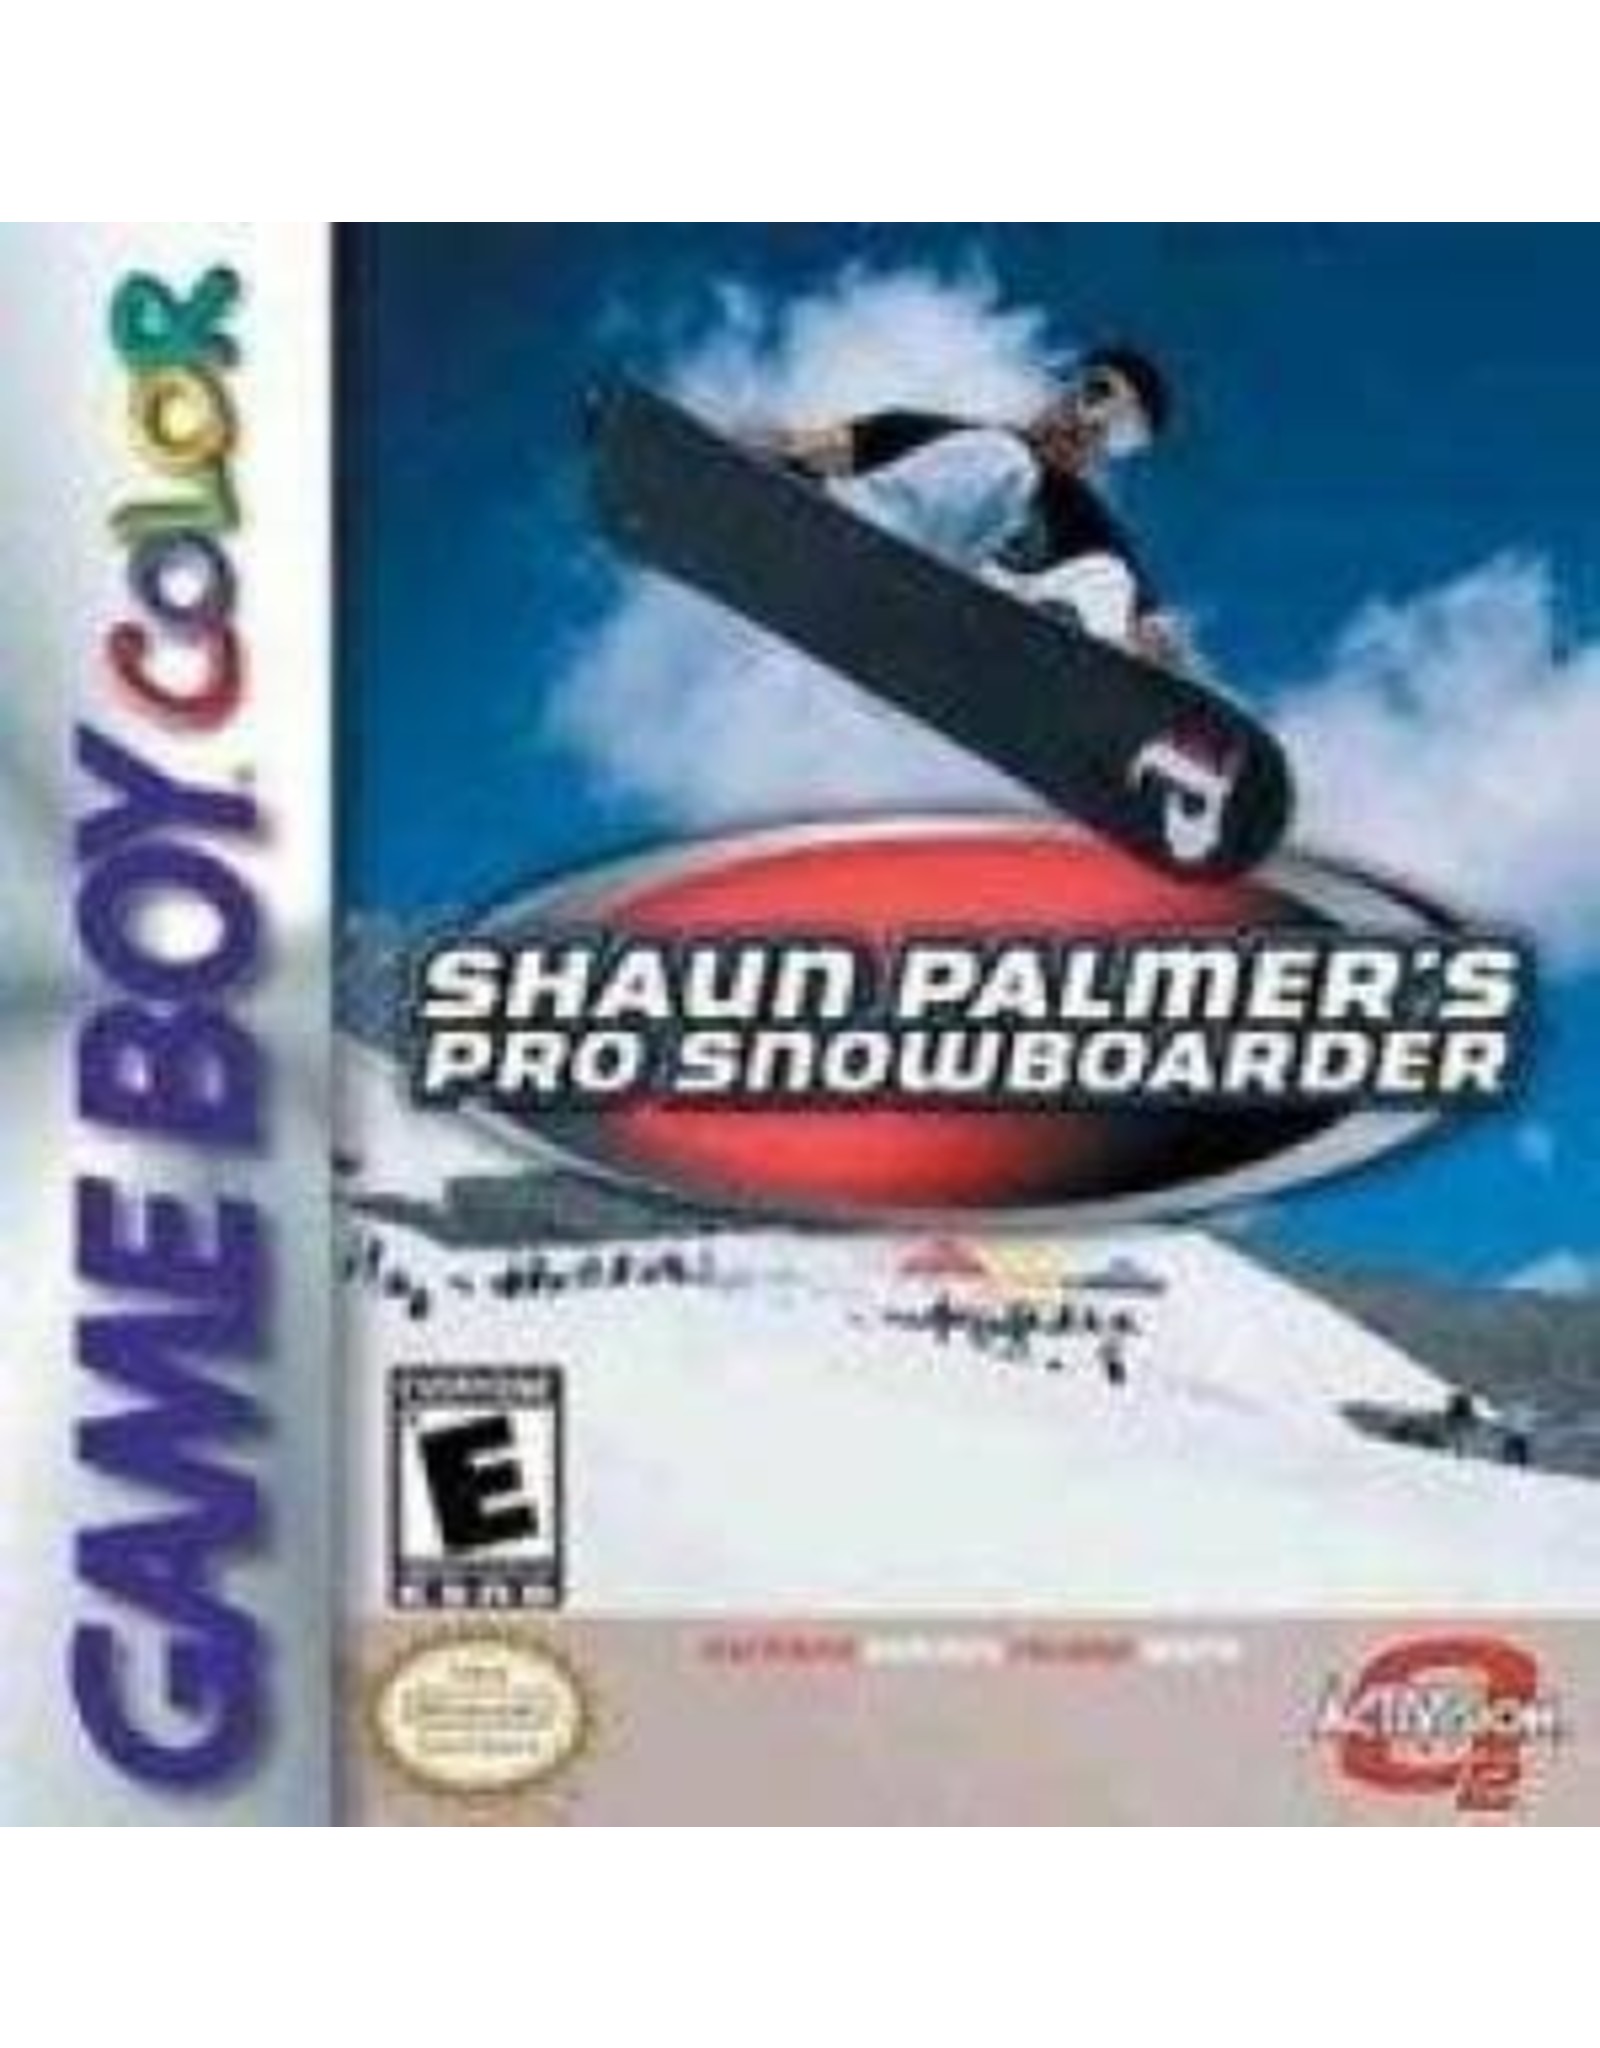 Game Boy Color Shaun Palmers Pro Snowboarder (Cart Only, Damaged Label)